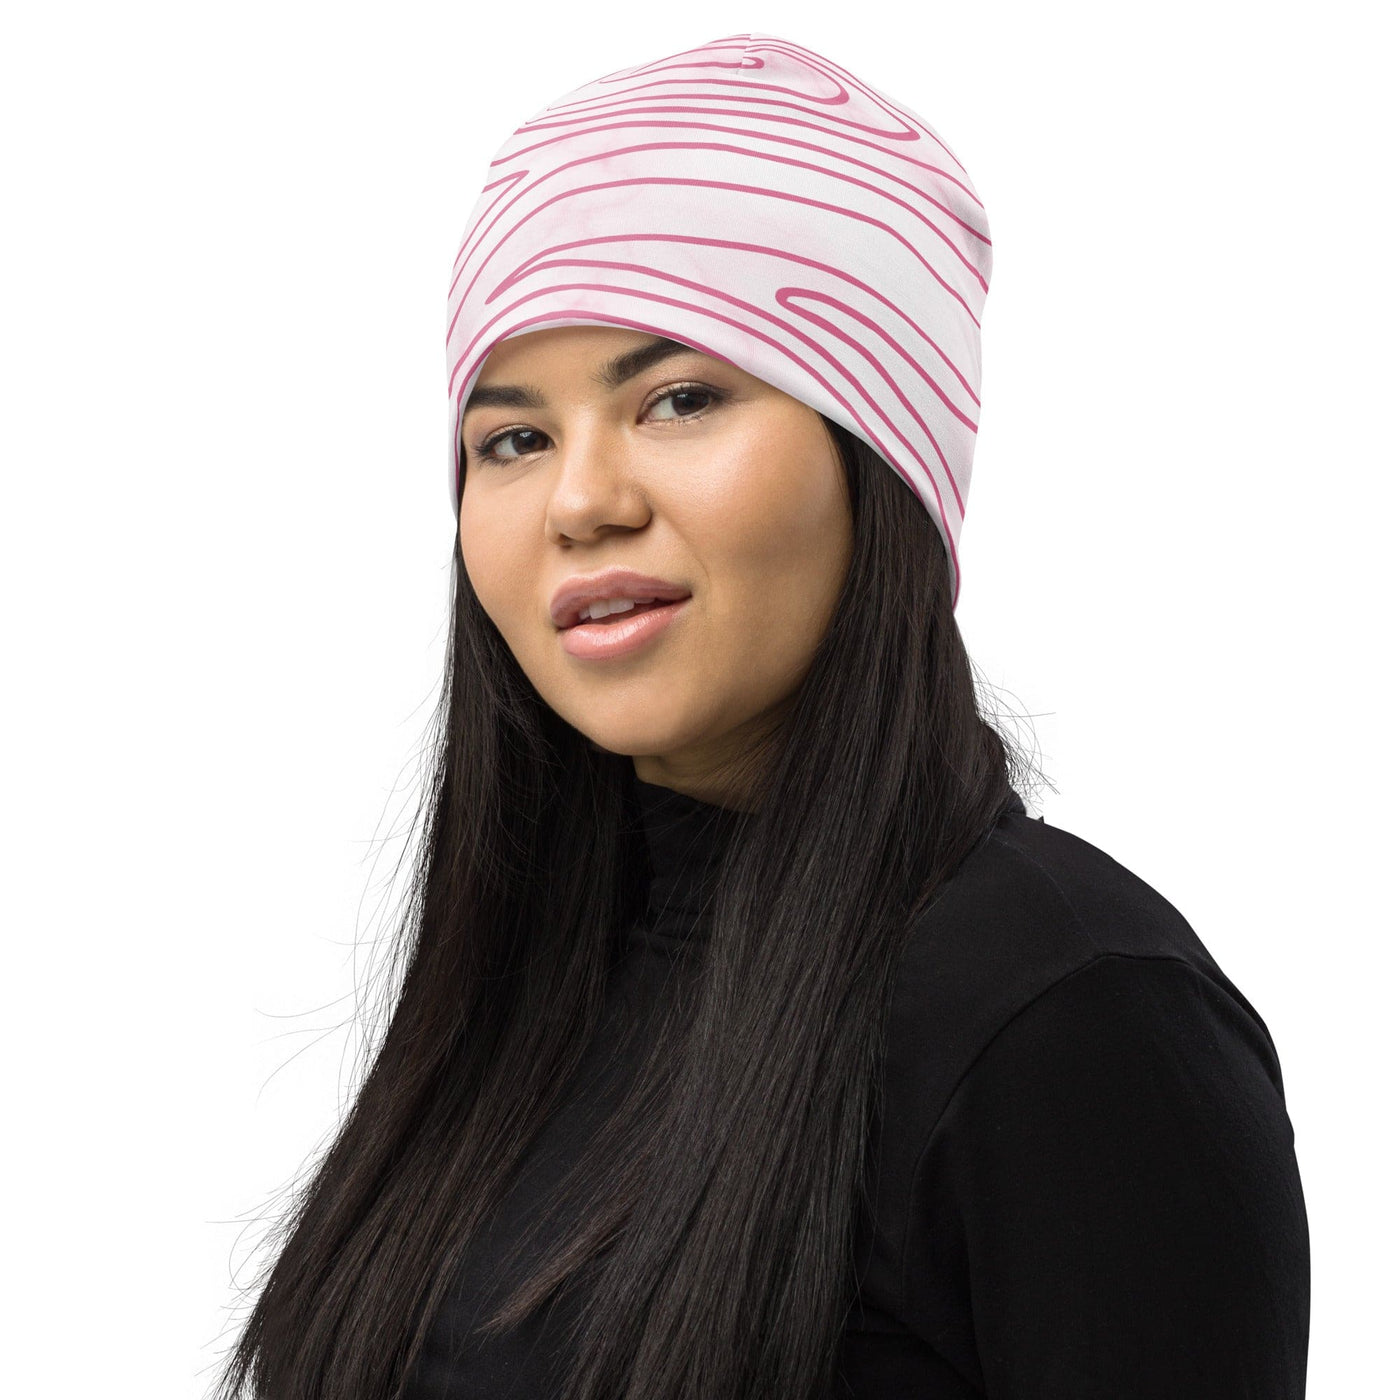 Double-layered Beanie Hat Pink Line Art Sketch Print